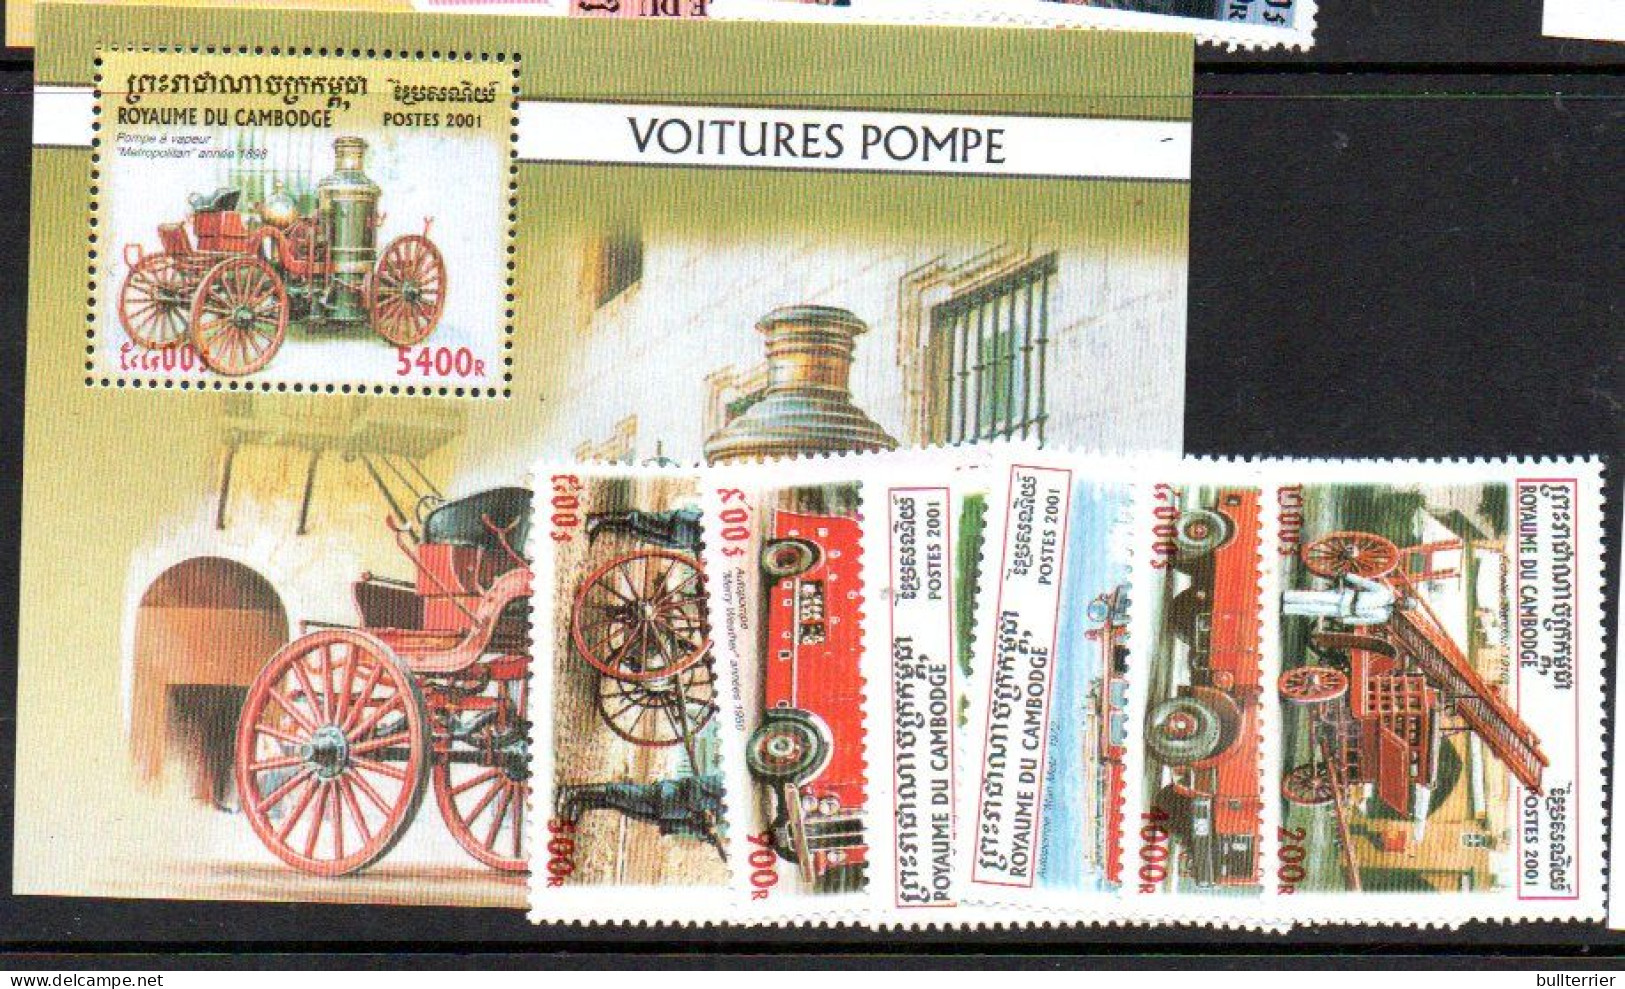 CAMBODIA - 2001- FIRE ENGINES SET OF 6 + SOUVENIR SHEET  MINT NEVER HINGED - Cambodia